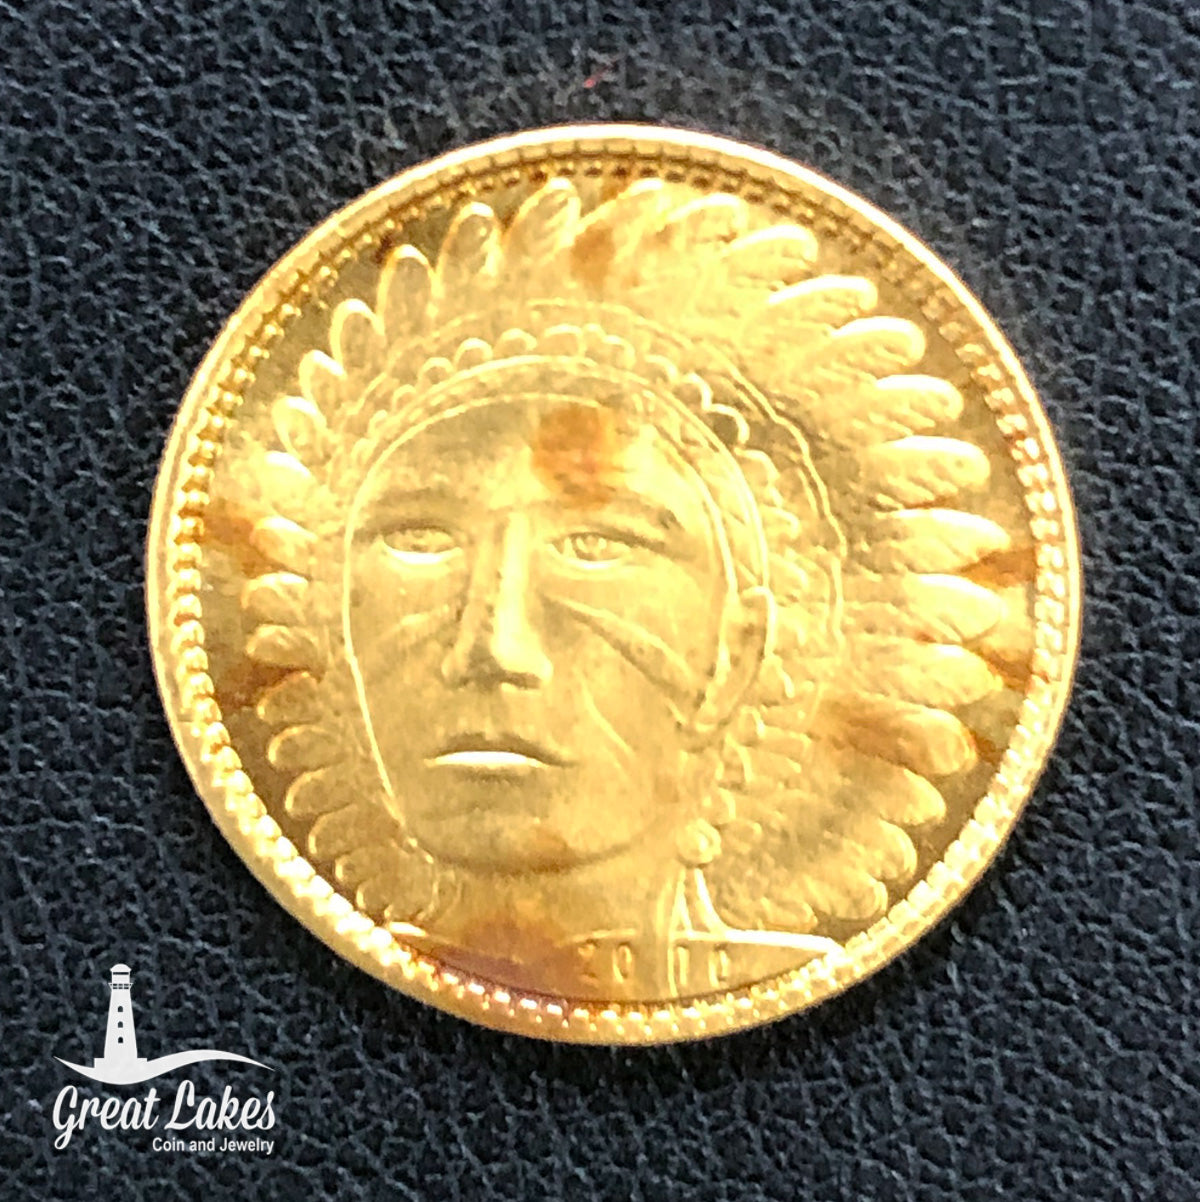 Generic 1/10 oz Gold Coin